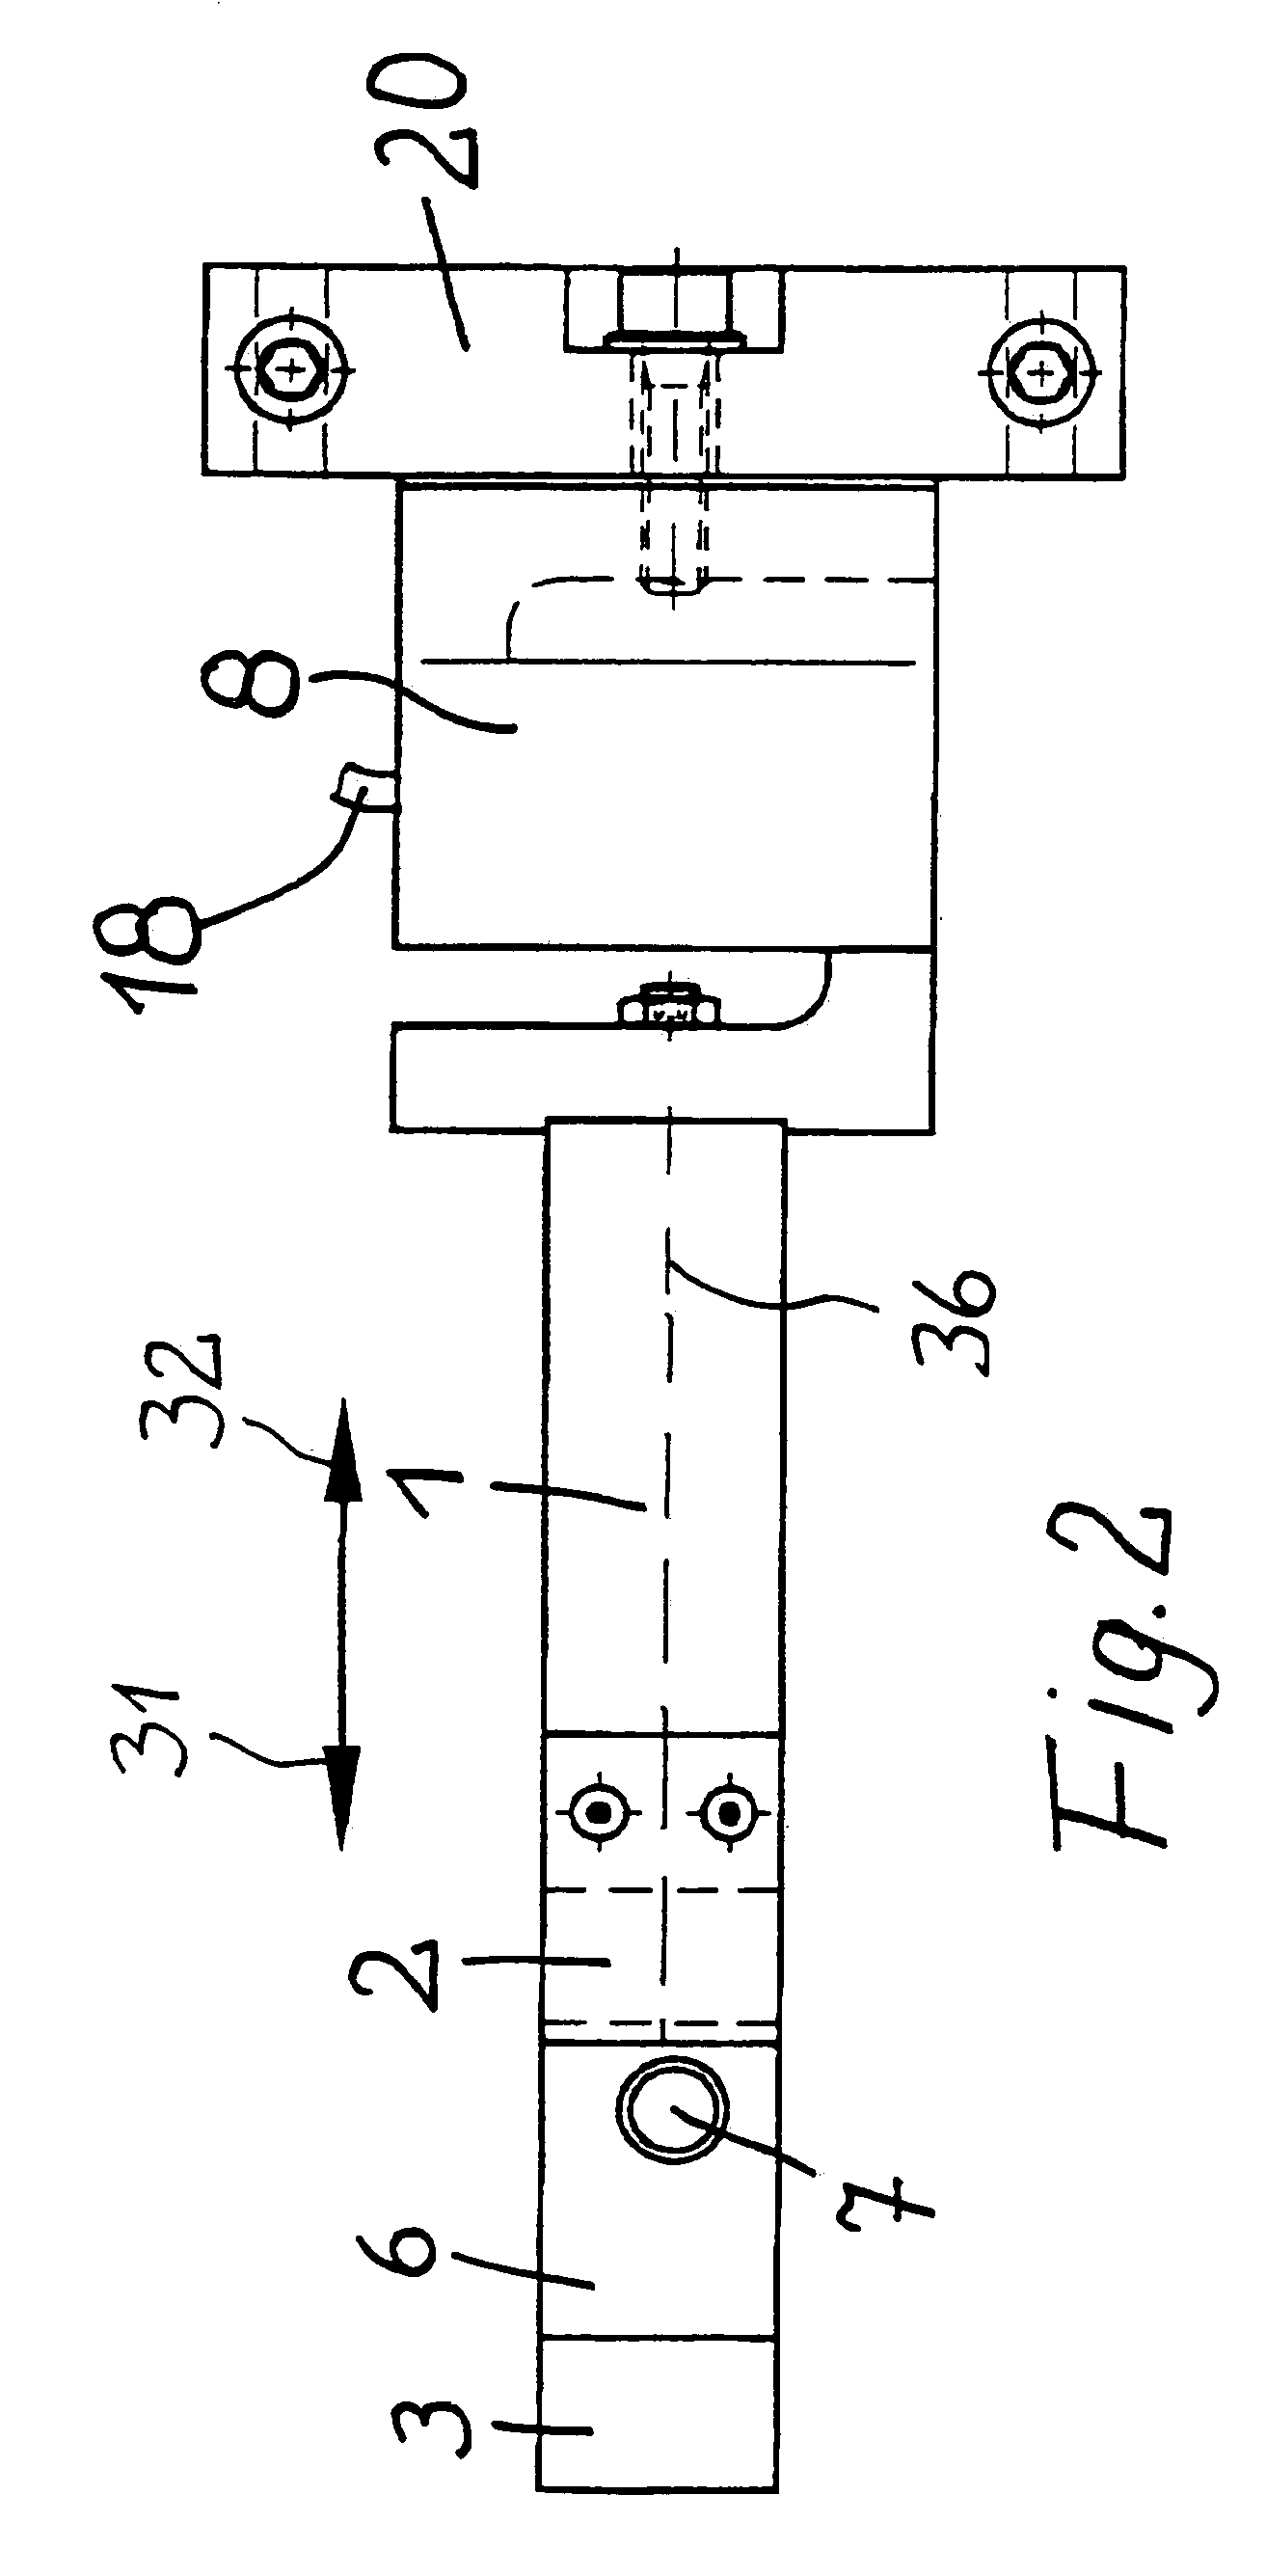 Method and device for the alignment and location of a sample such as tablets, pills or tablettes